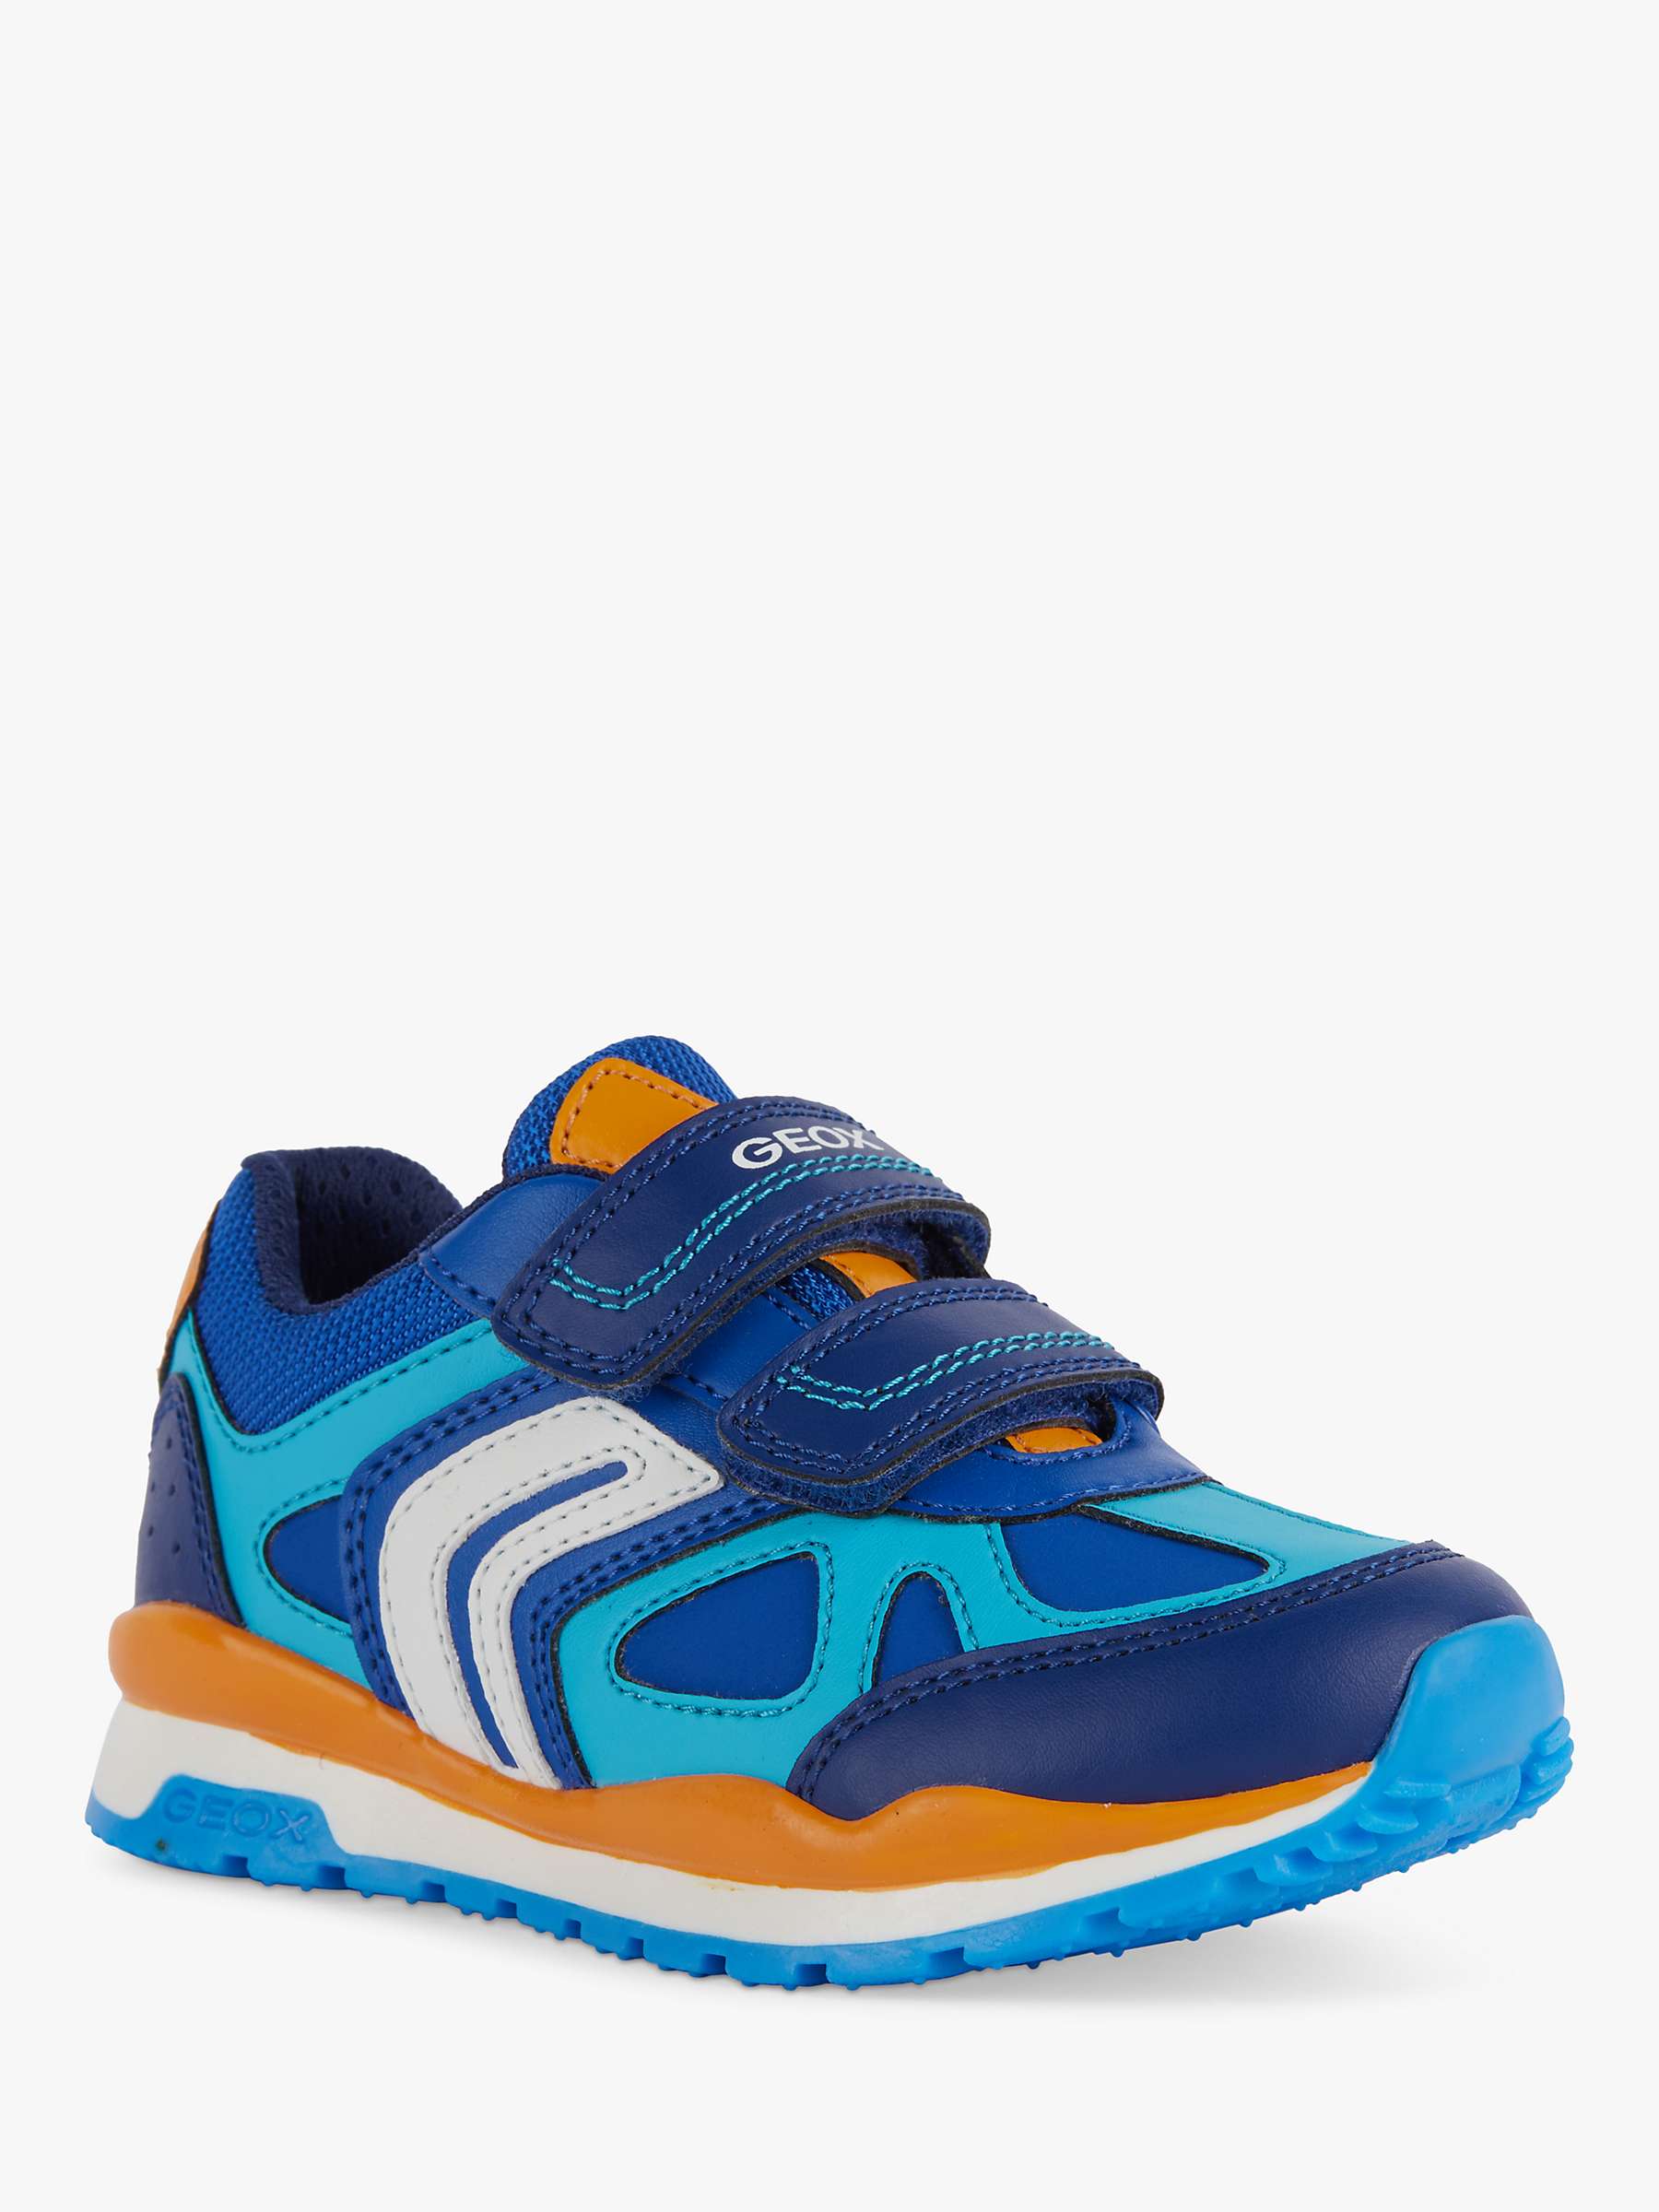 Buy Geox Kids' Pavel D Low-Cut Trainers Online at johnlewis.com